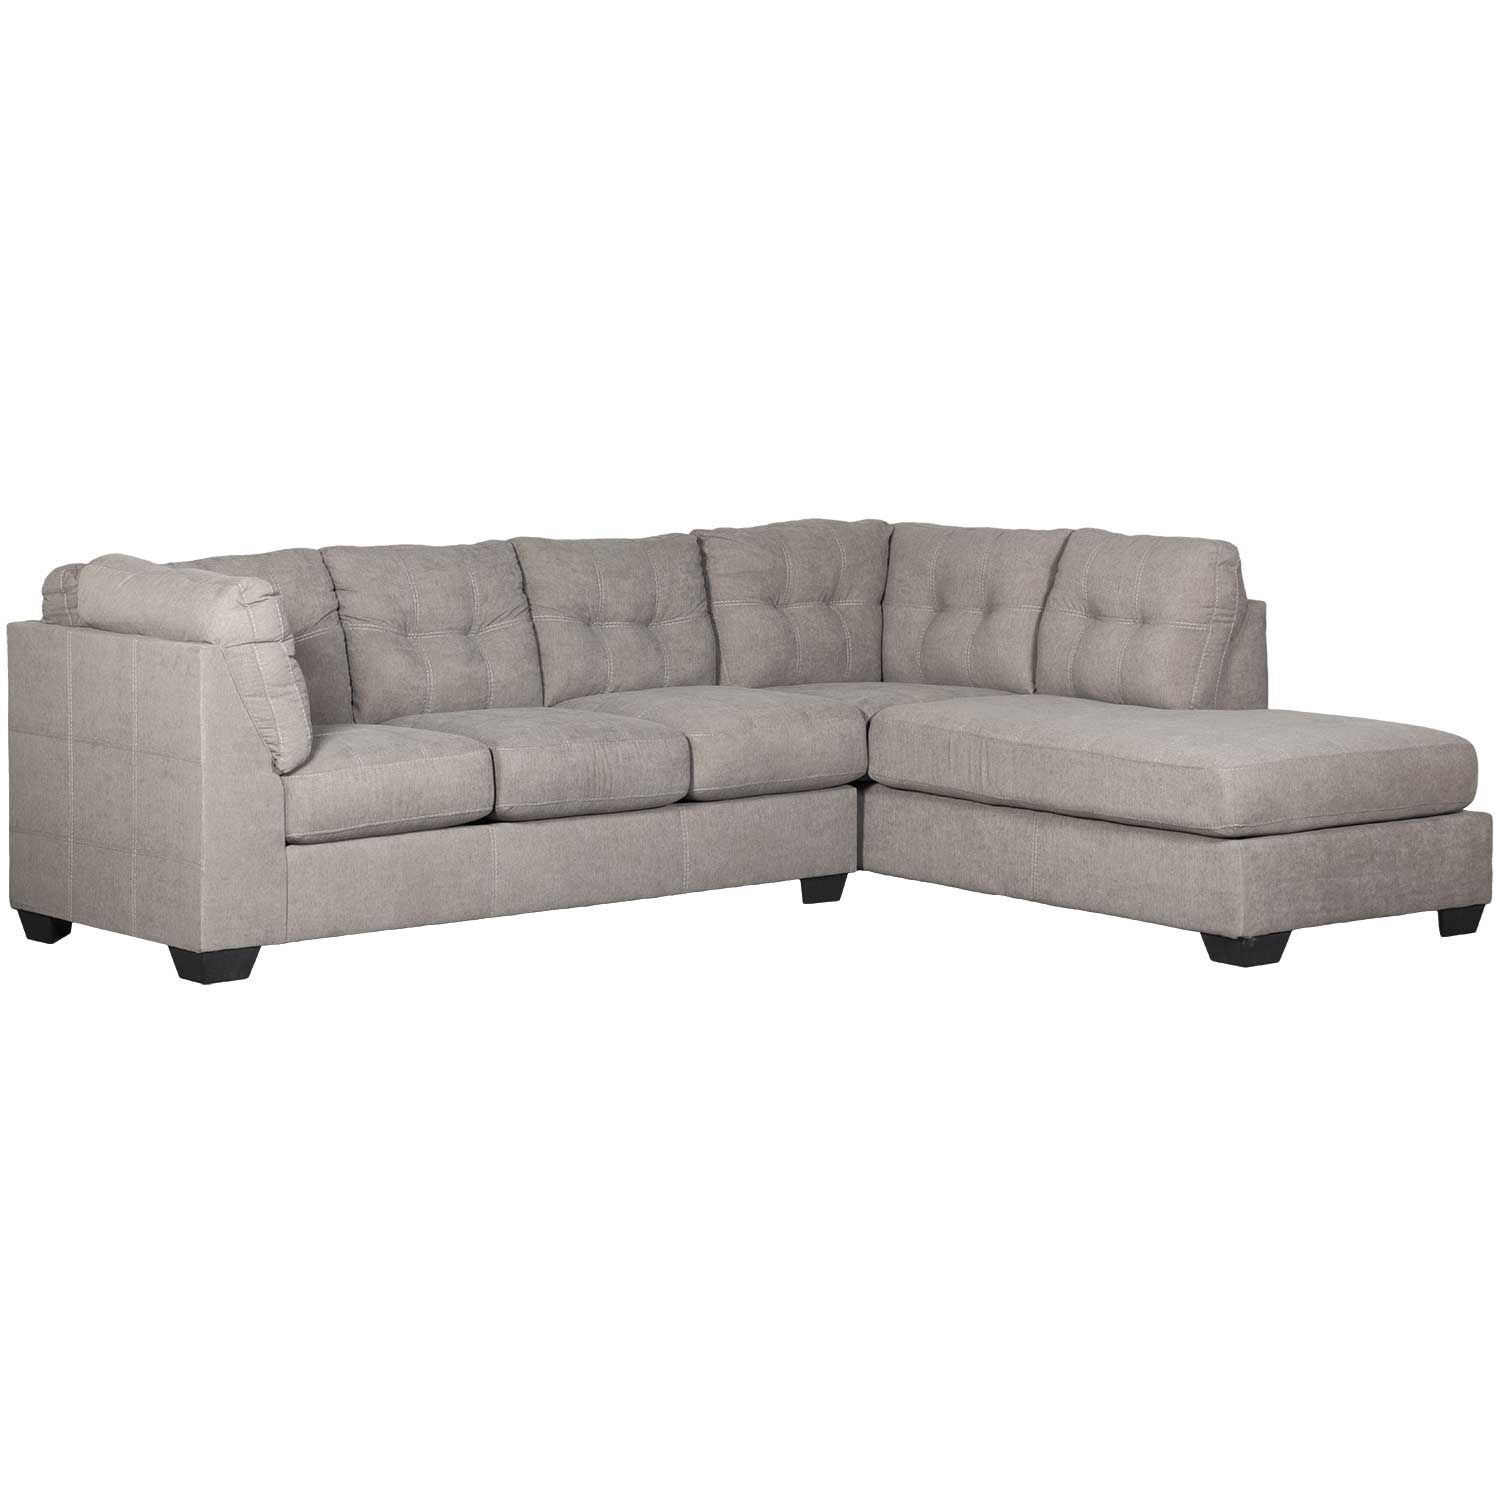 Maier Charcoal 2 Piece Sectional With Raf Chaise 4520017 Pertaining To Evan 2 Piece Sectionals With Raf Chaise (View 13 of 15)